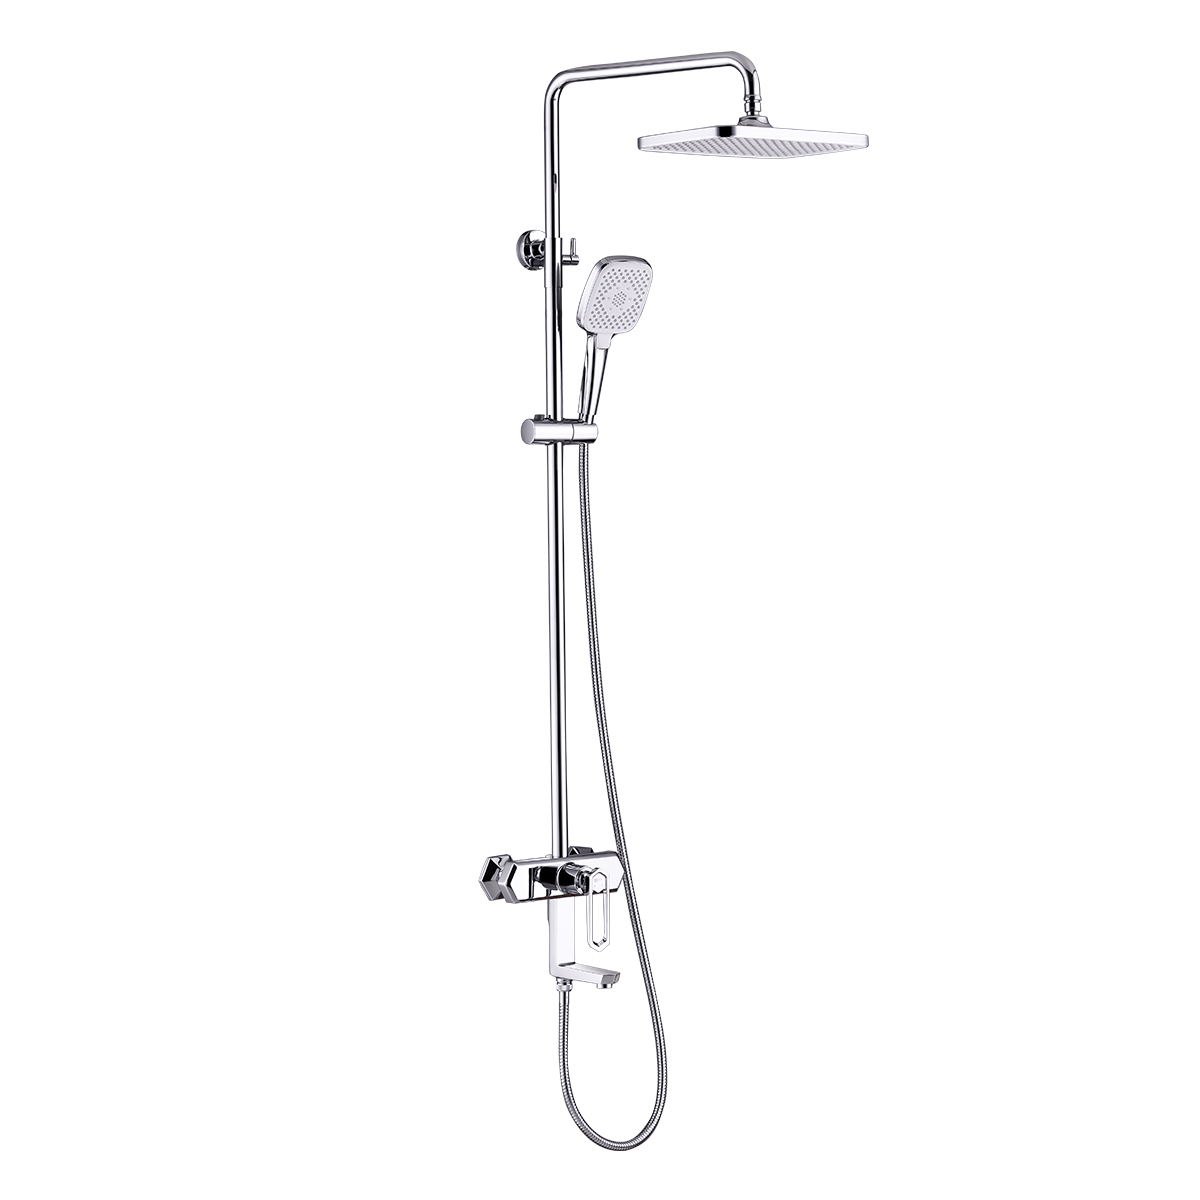 LM3962C Bath and shower faucet with adjustable rod height, swivel spout and «Tropical rain» shower head